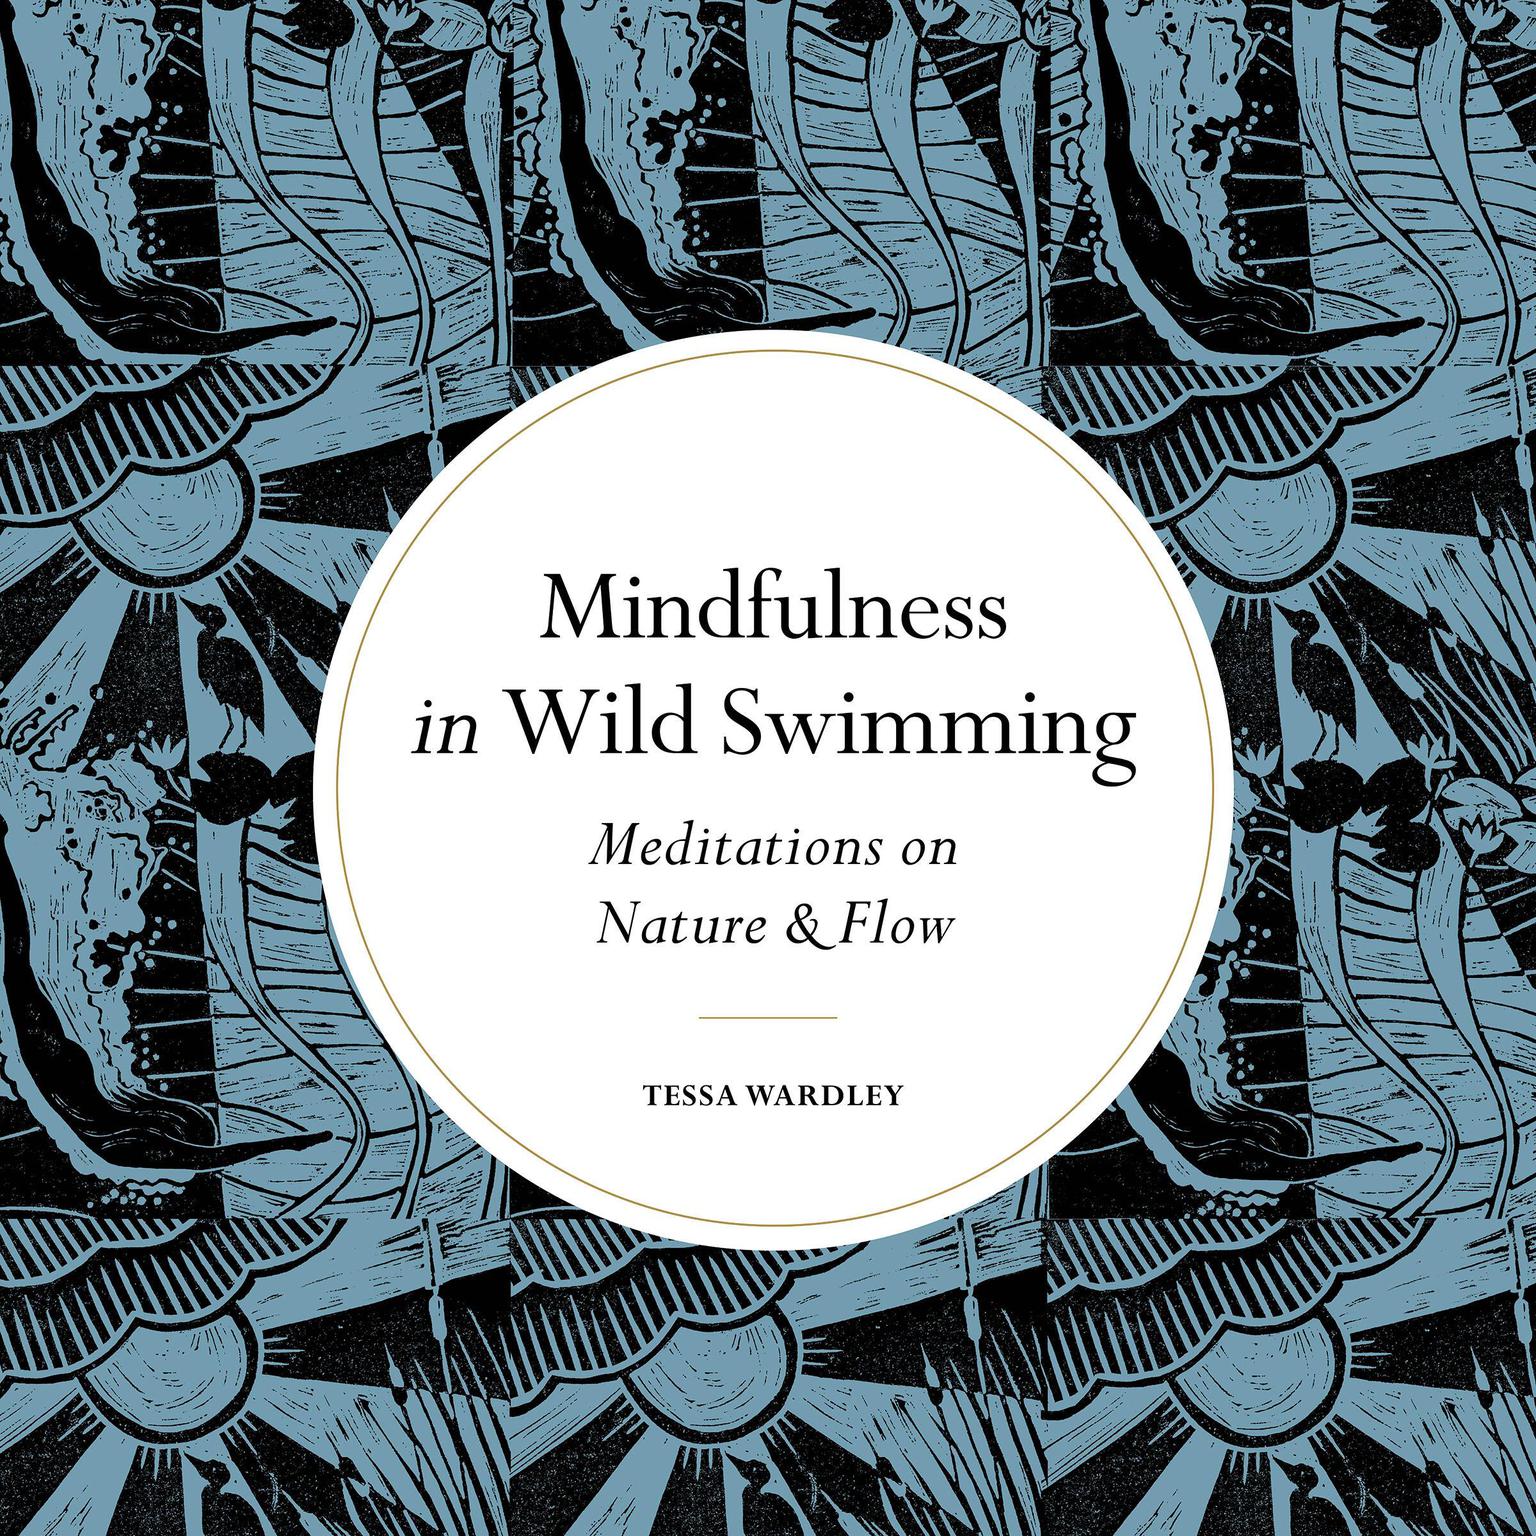 Mindfulness in Wild Swimming: Meditations on Nature & Flow Audiobook, by Tessa Wardley